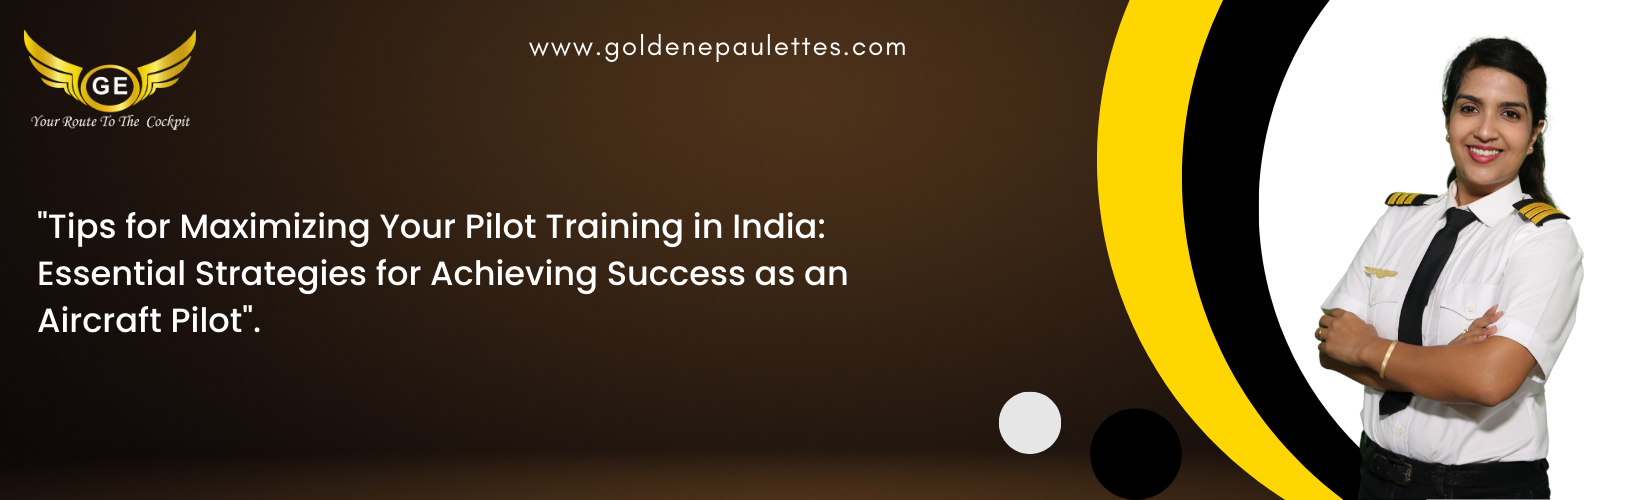 How to Get the Most Out of Your Pilot Training in India